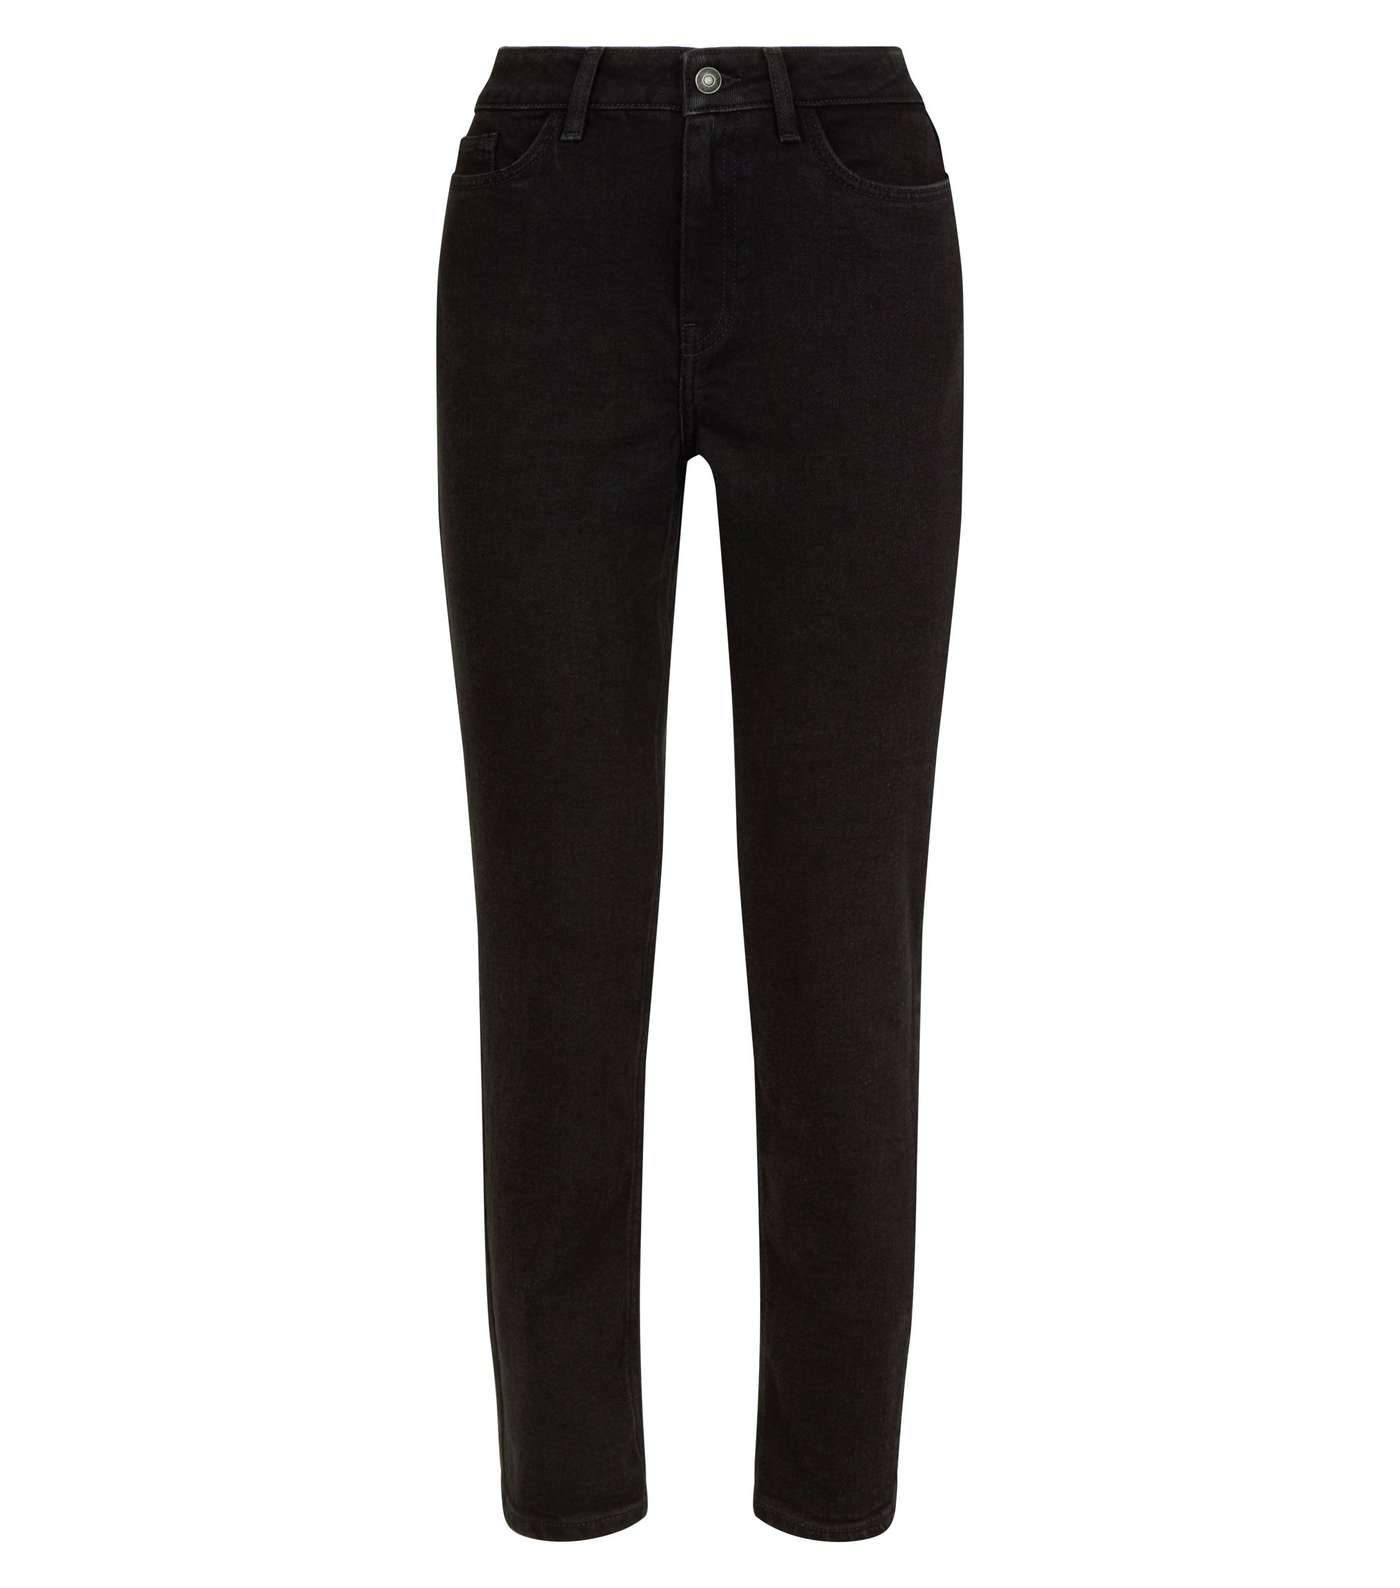 Black Relaxed Skinny Leyla Jeans Image 4